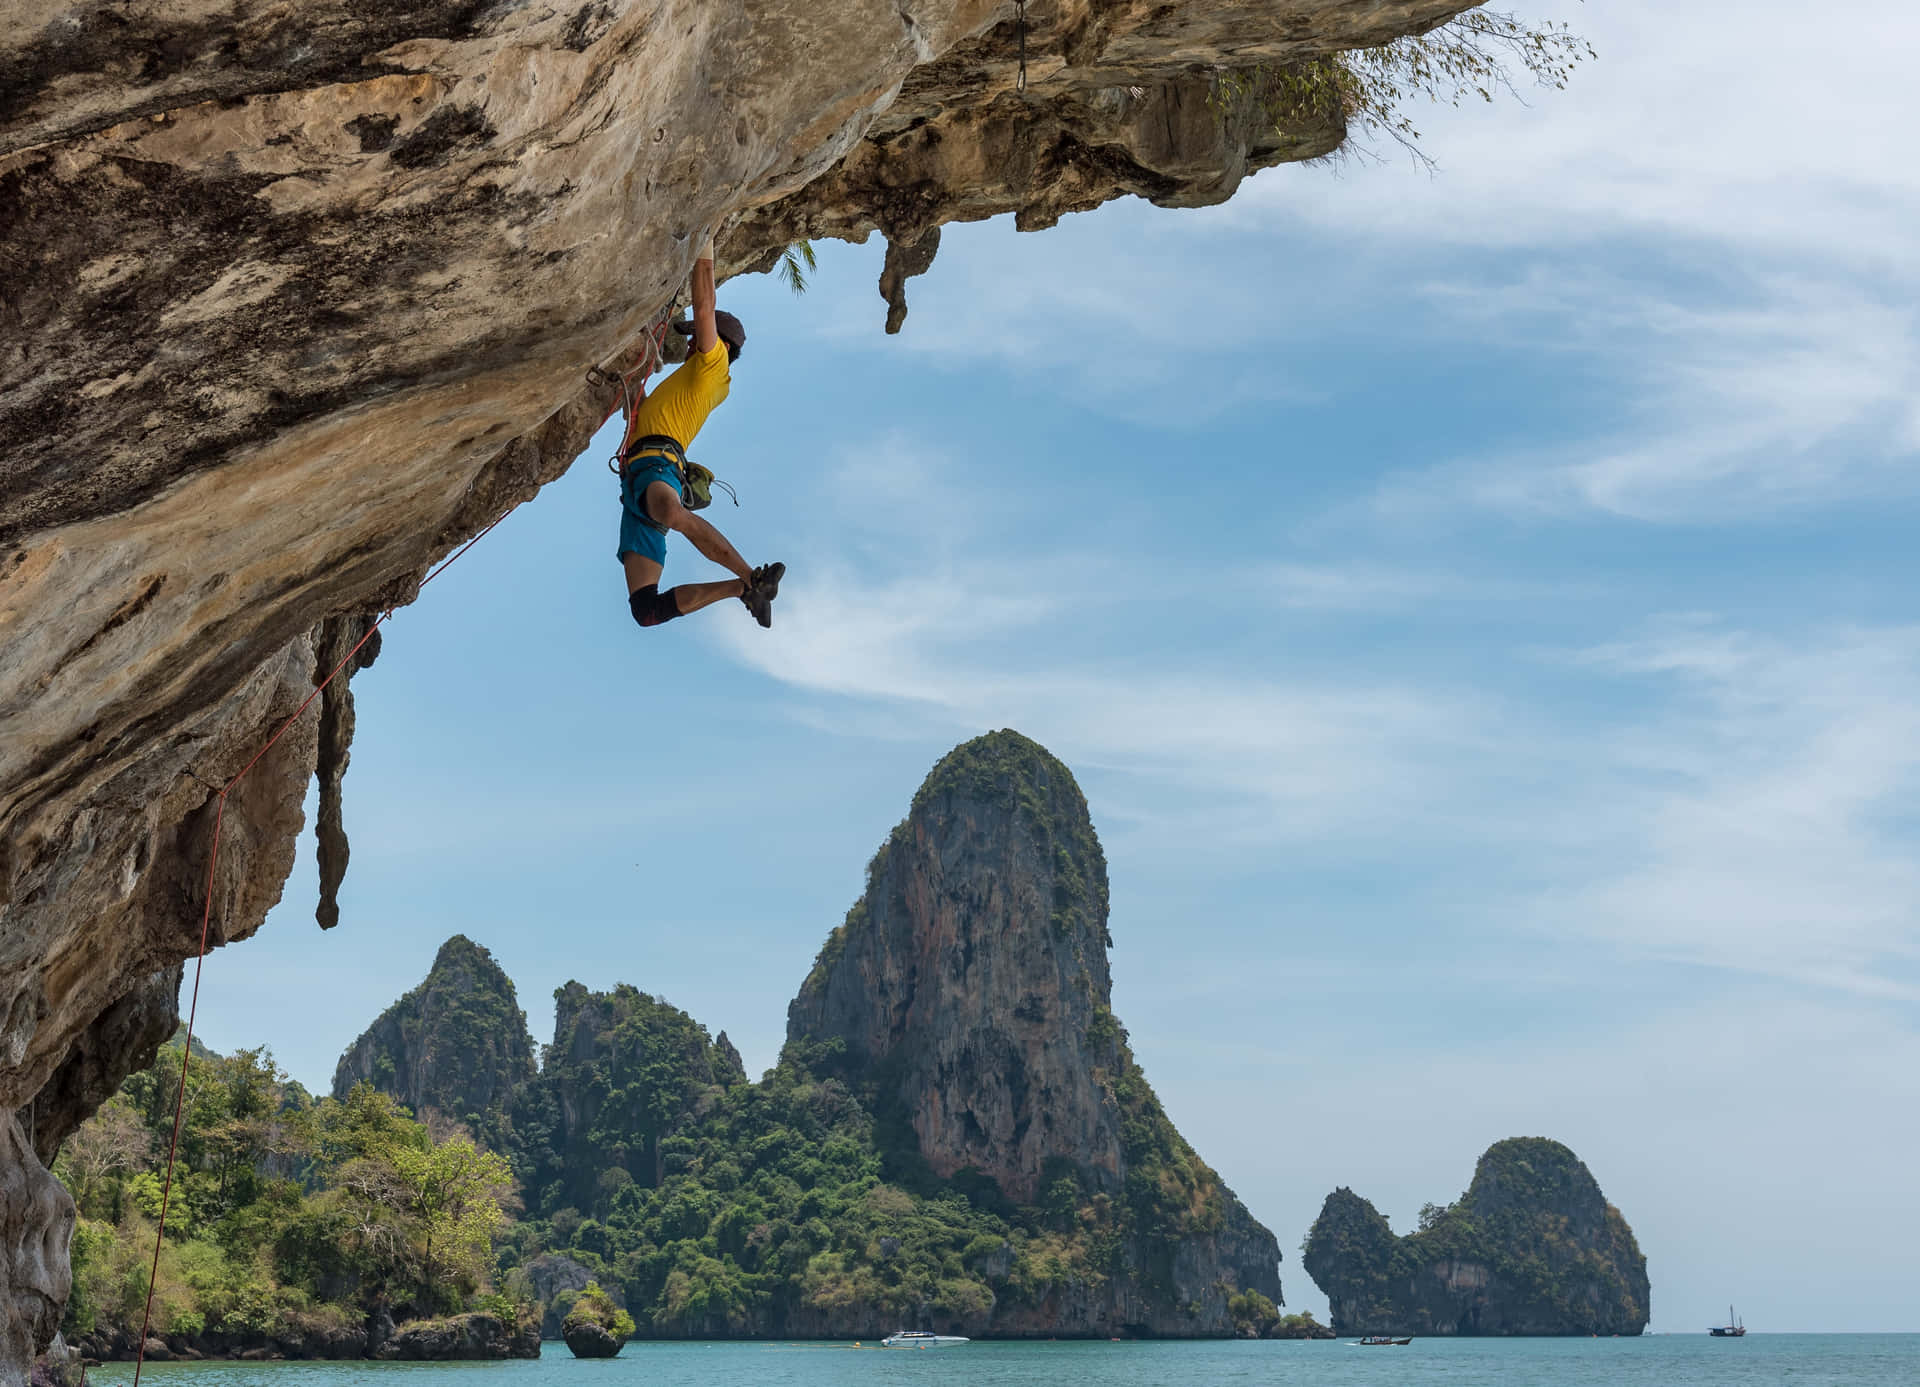 Adventurous Free Climbing on an Arduous Route Wallpaper